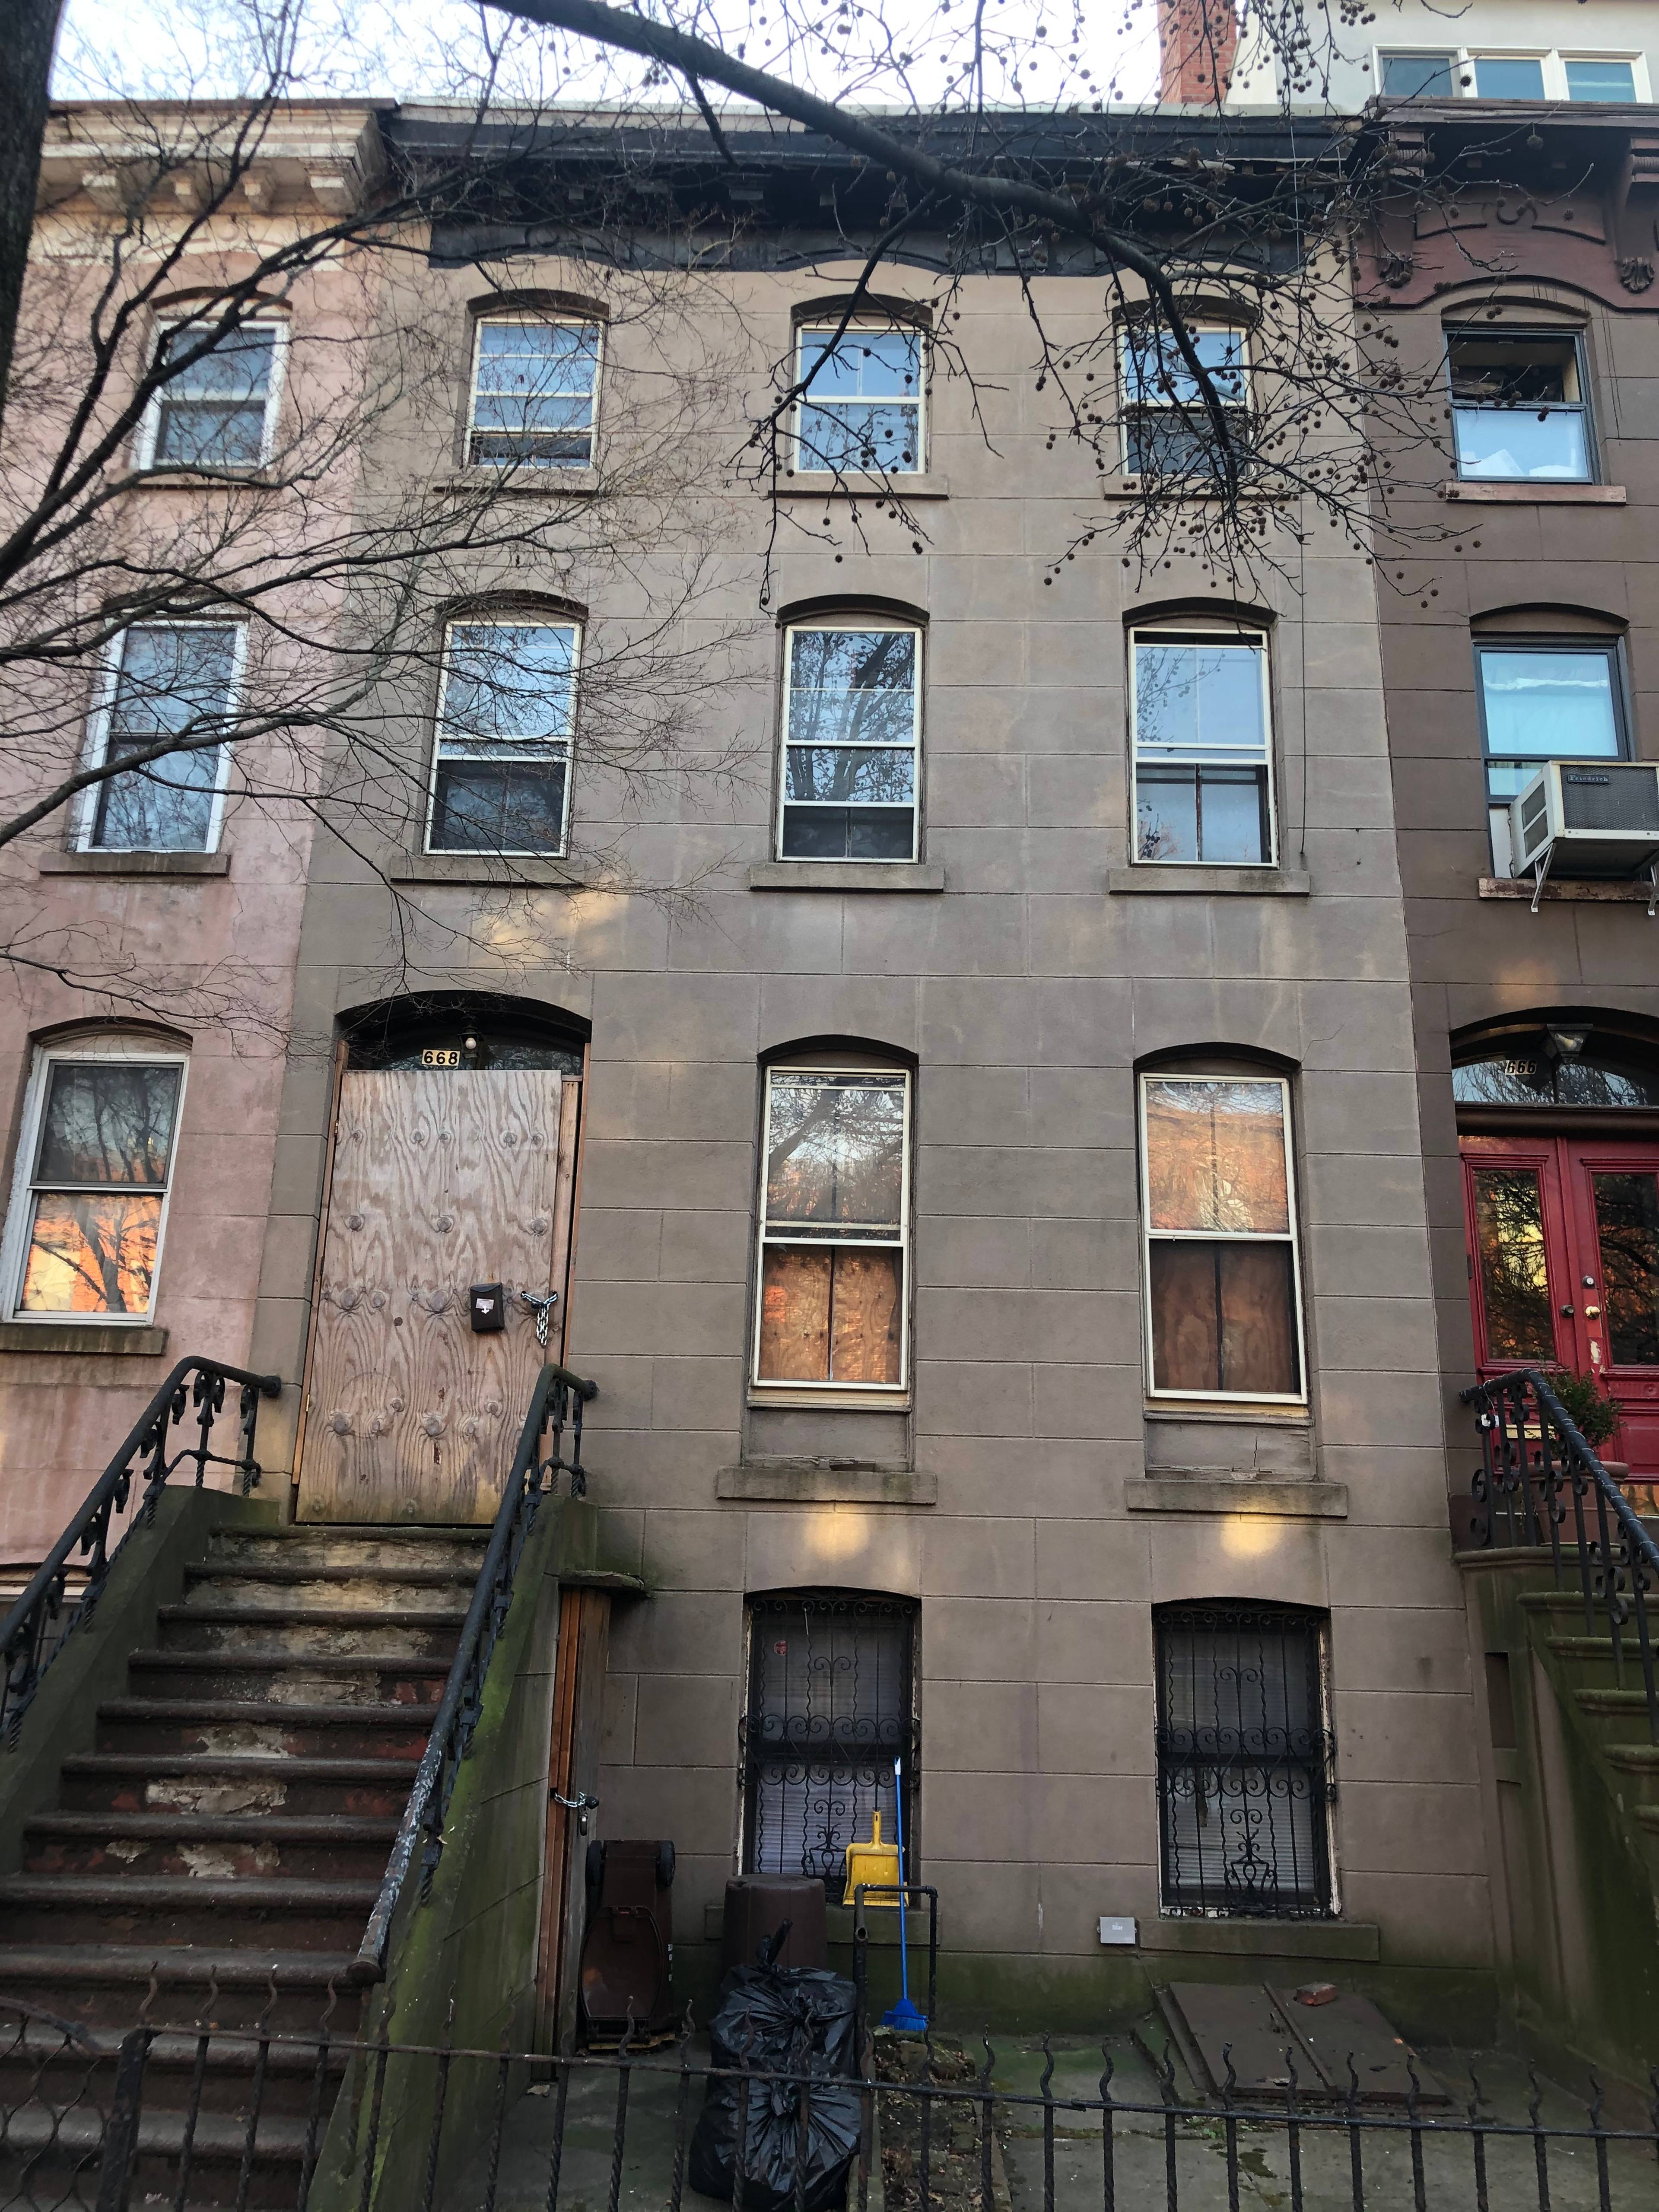 TOTALLY VACANT THIS HOUSE NEEDS A COMPLETE GUT RENOVATION Four story, 20 foot wide by 36 foot deep Brownstone on a quaint tree lined block in Park Slope Brooklyn.